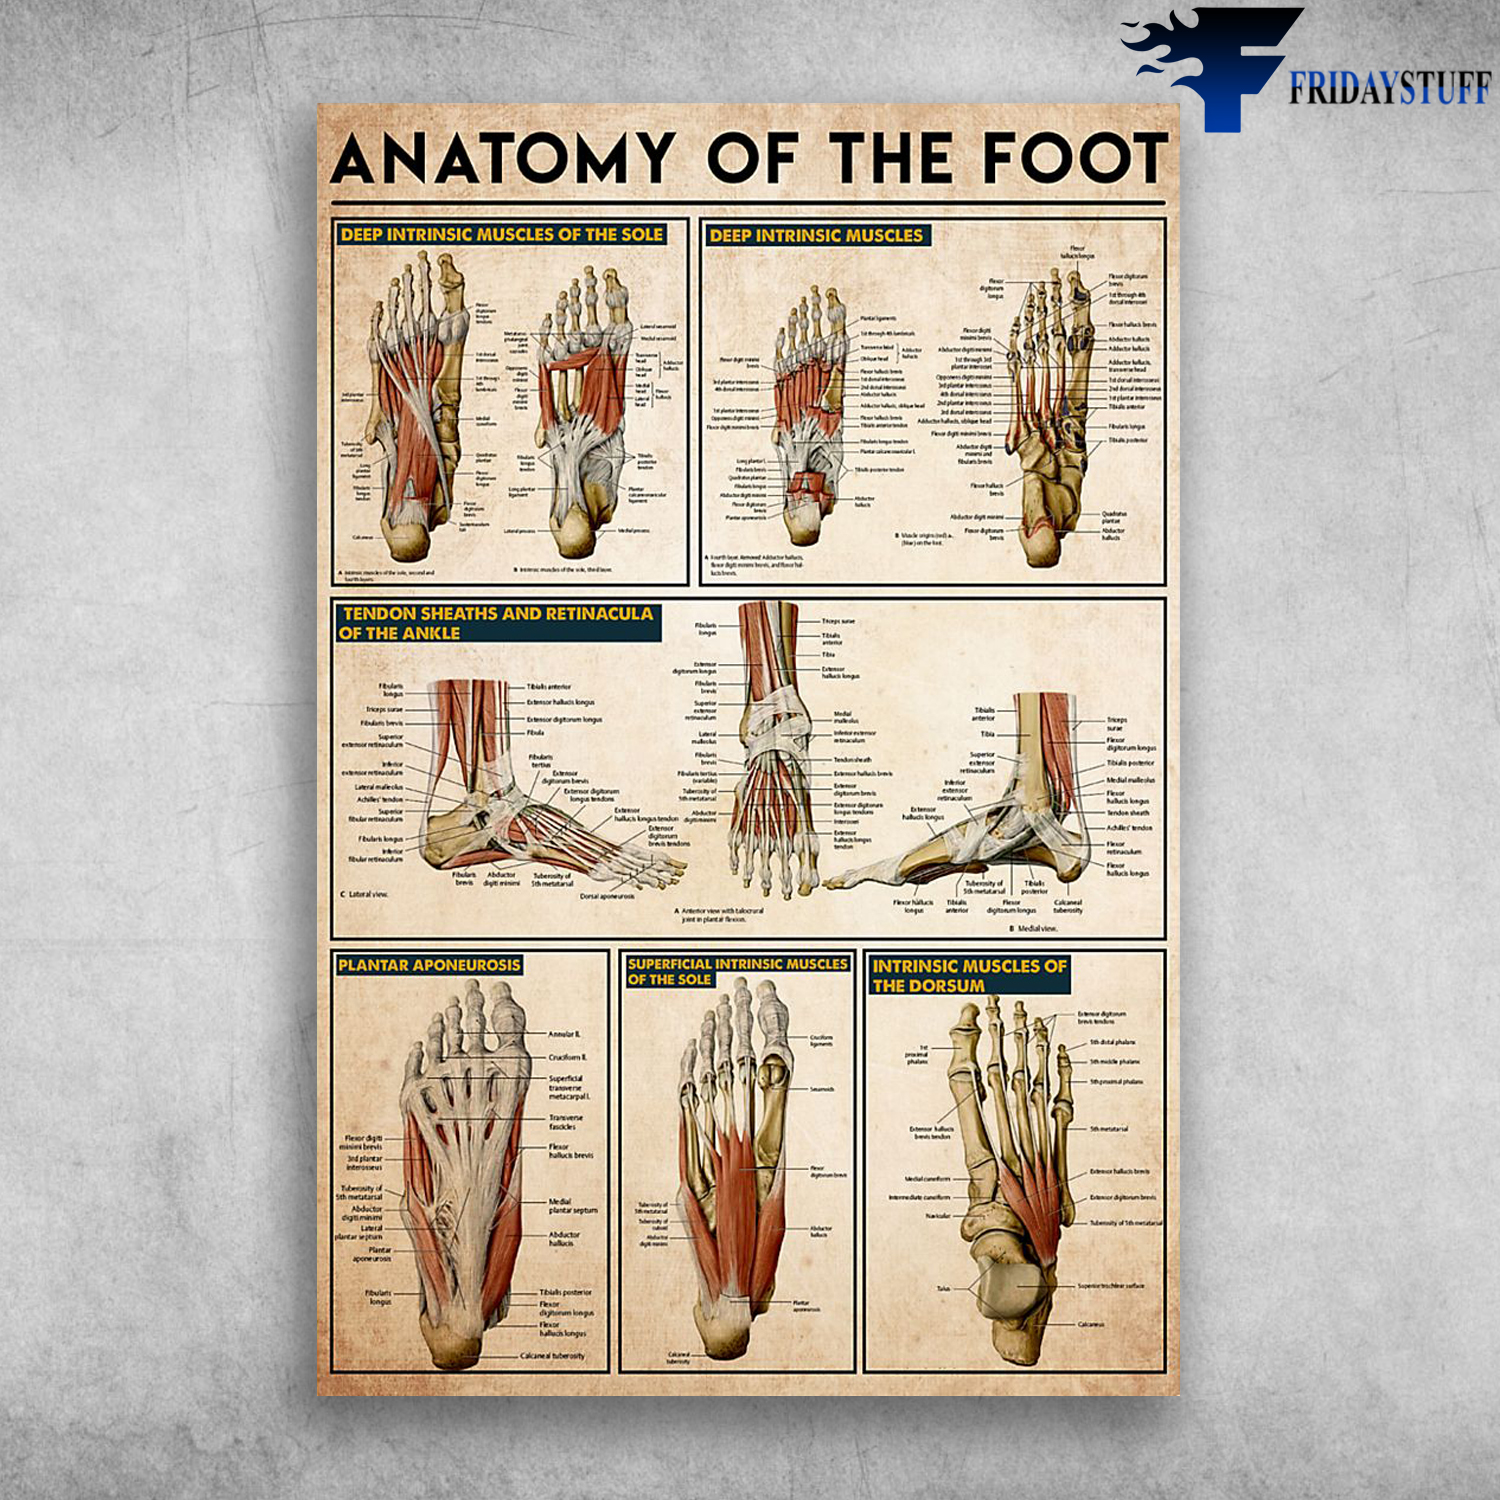 Anatomy Of The Foot Deep Intrinsic Muscle Of The Sole